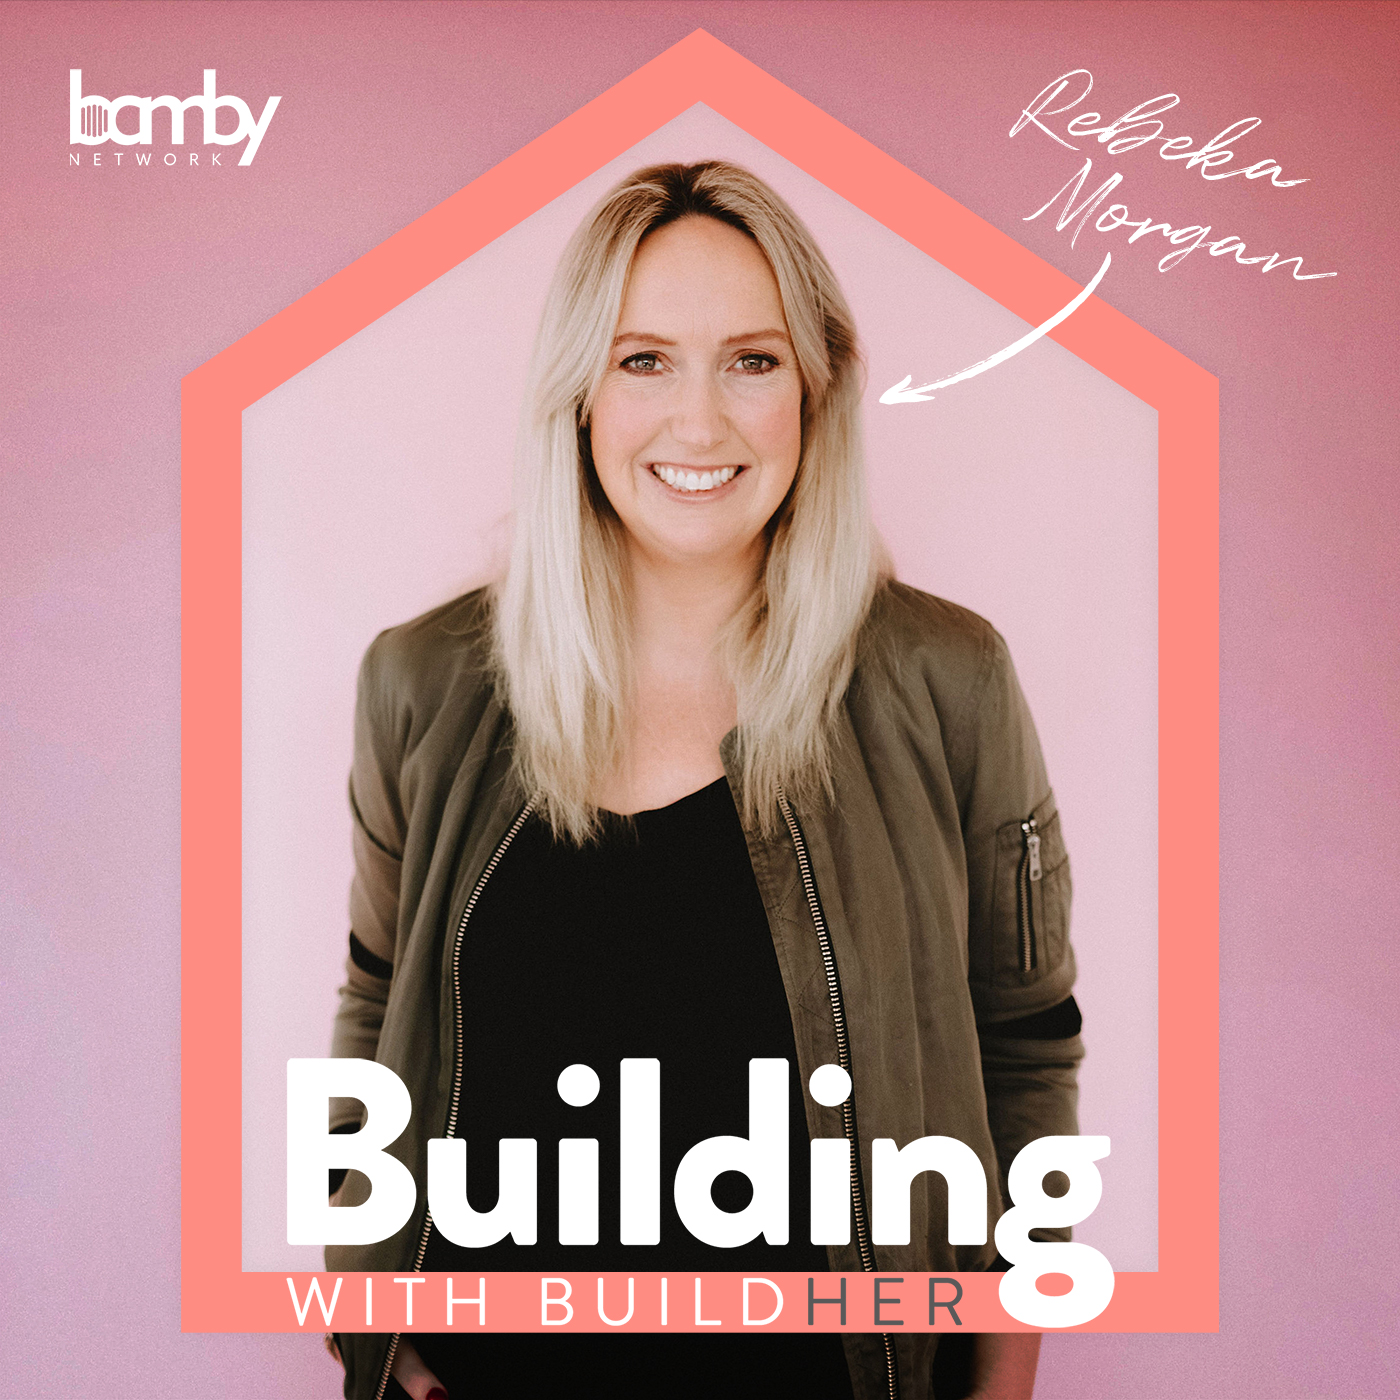 Top Takeaways from the BuildHer8